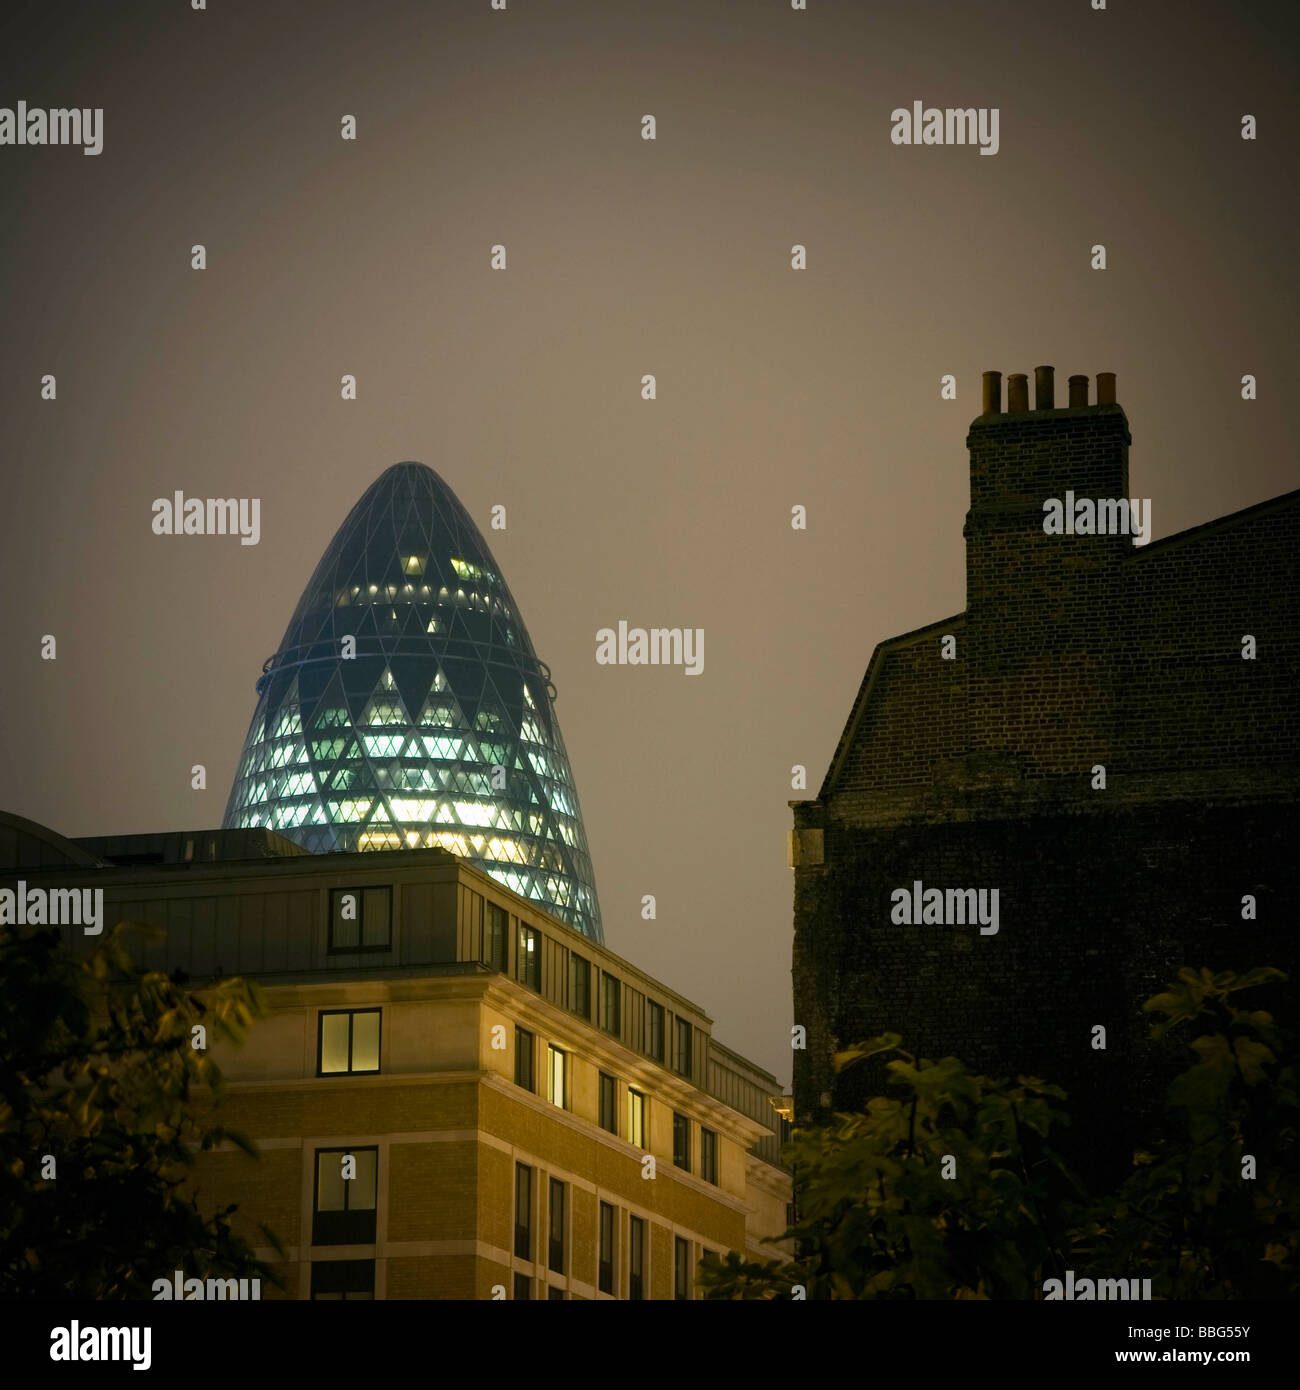 Gherkin building at night Banque D'Images